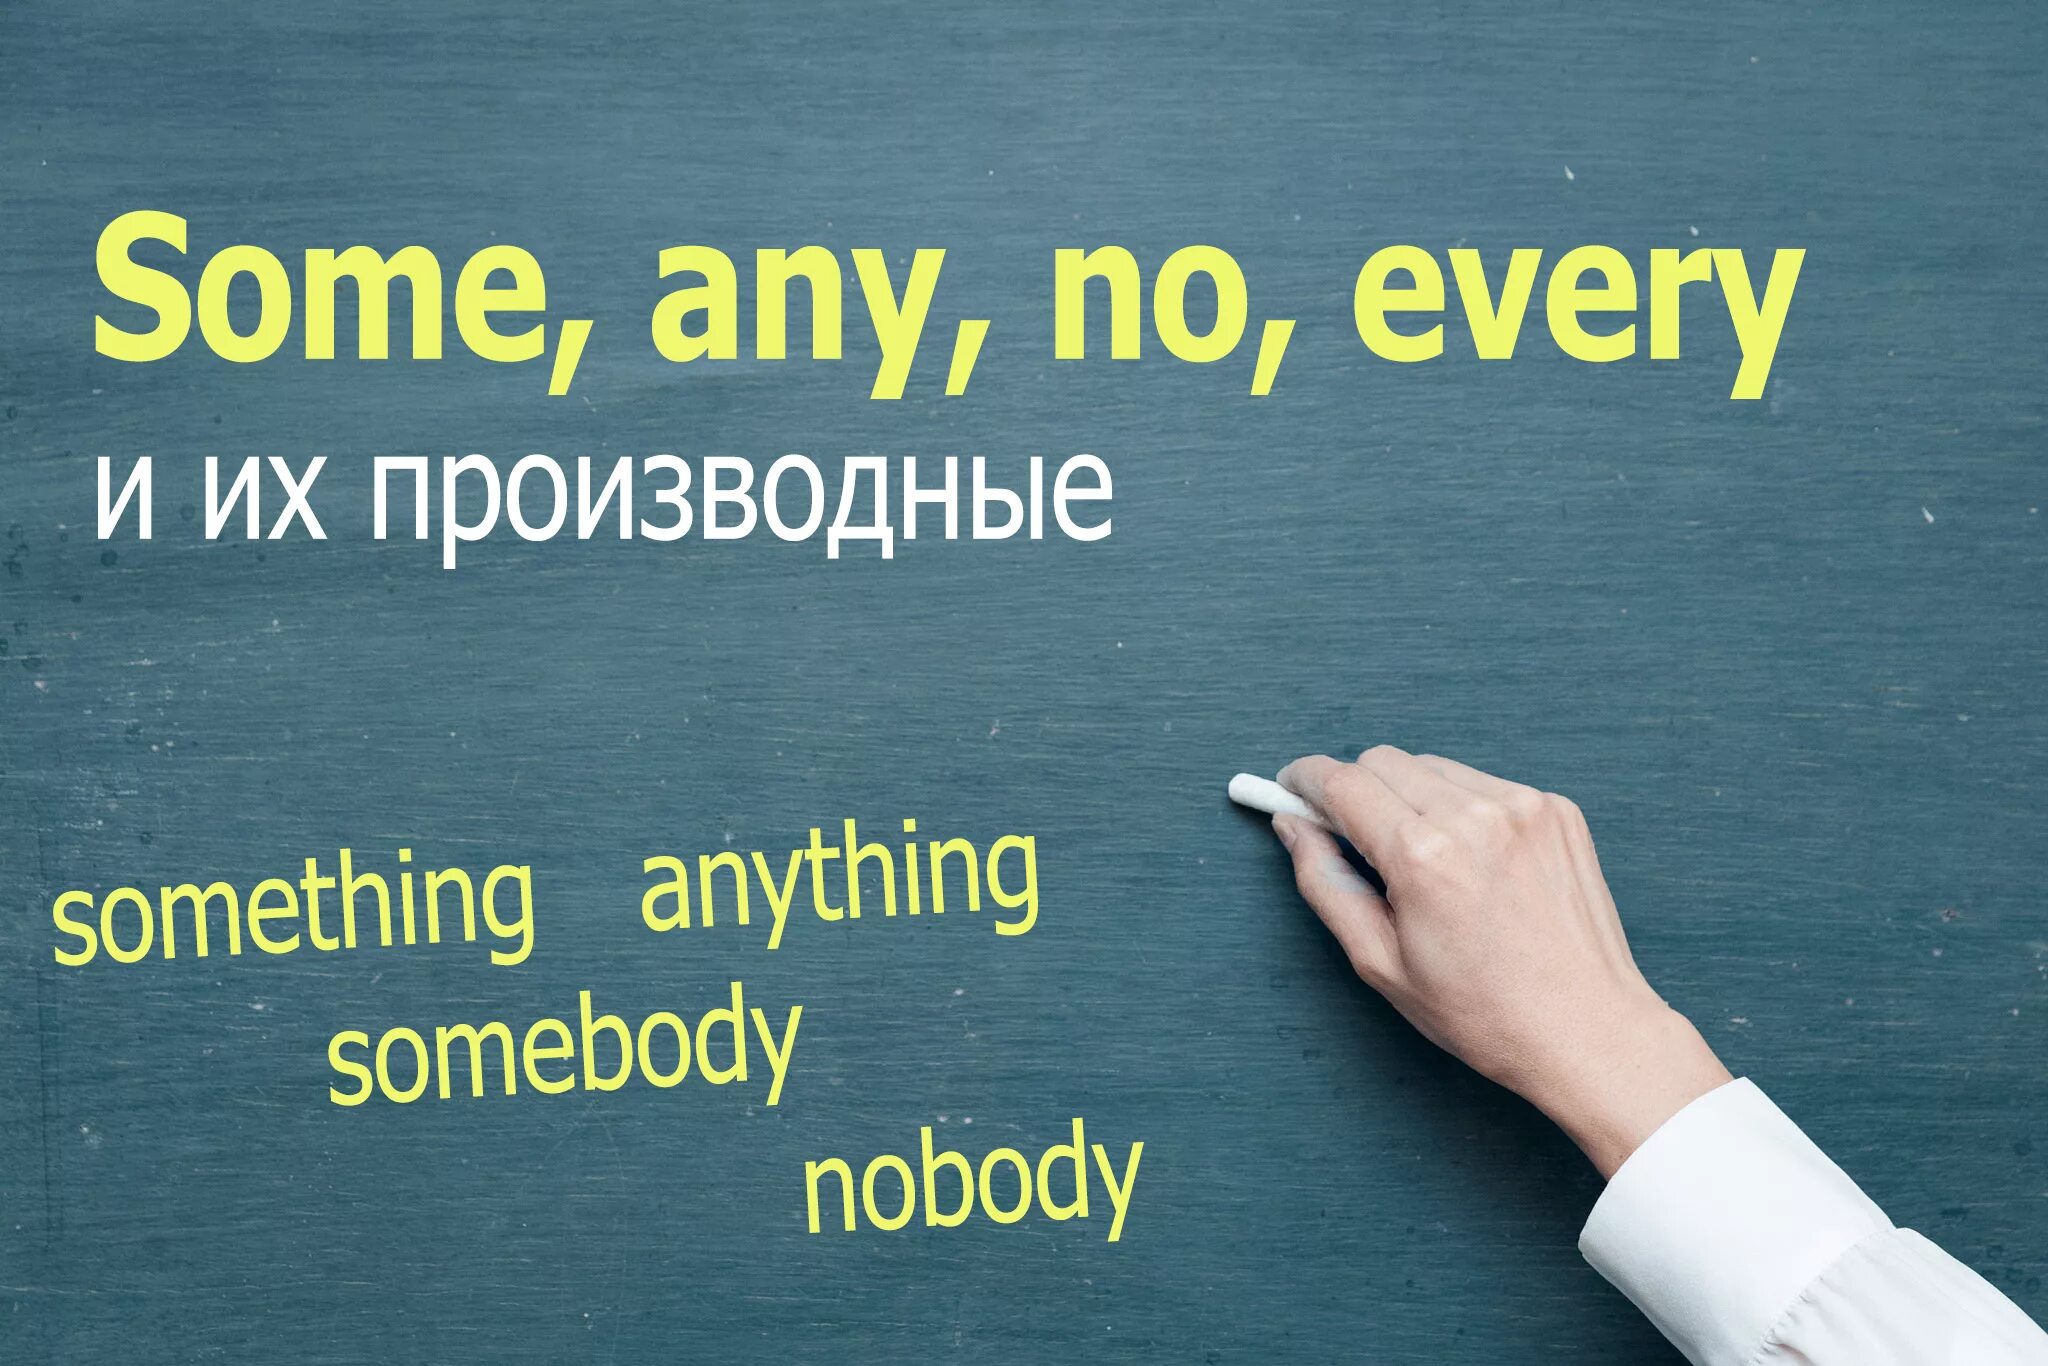 Everything русский язык. Some any every правило. Местоимения some any no every. Употребление some any no every. Some any no every правило.